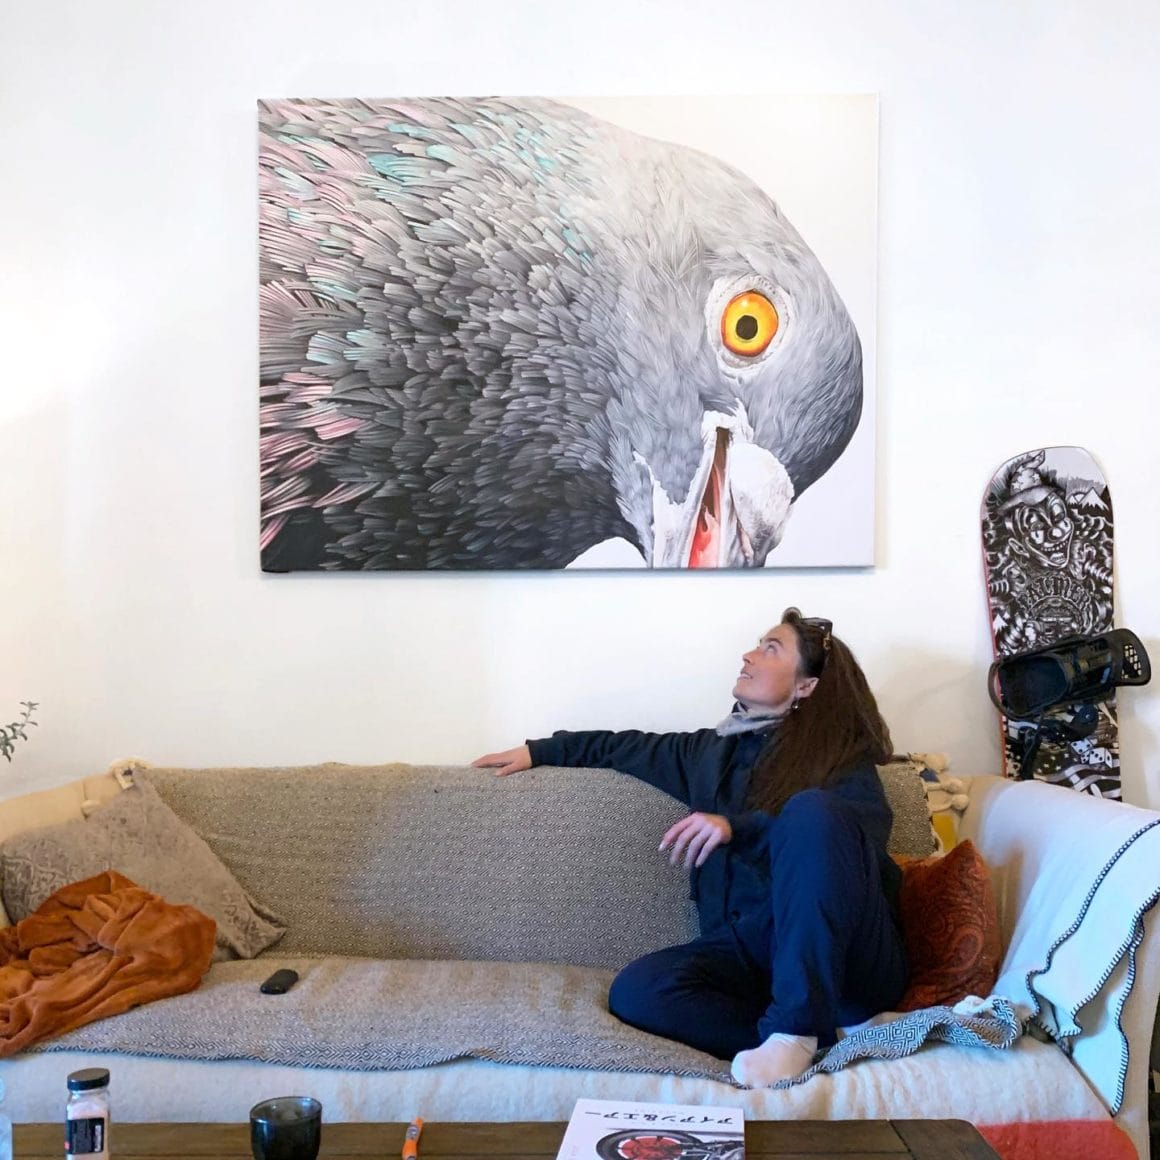 Adèle admires a work painted by herself which is a pigeon looking down.